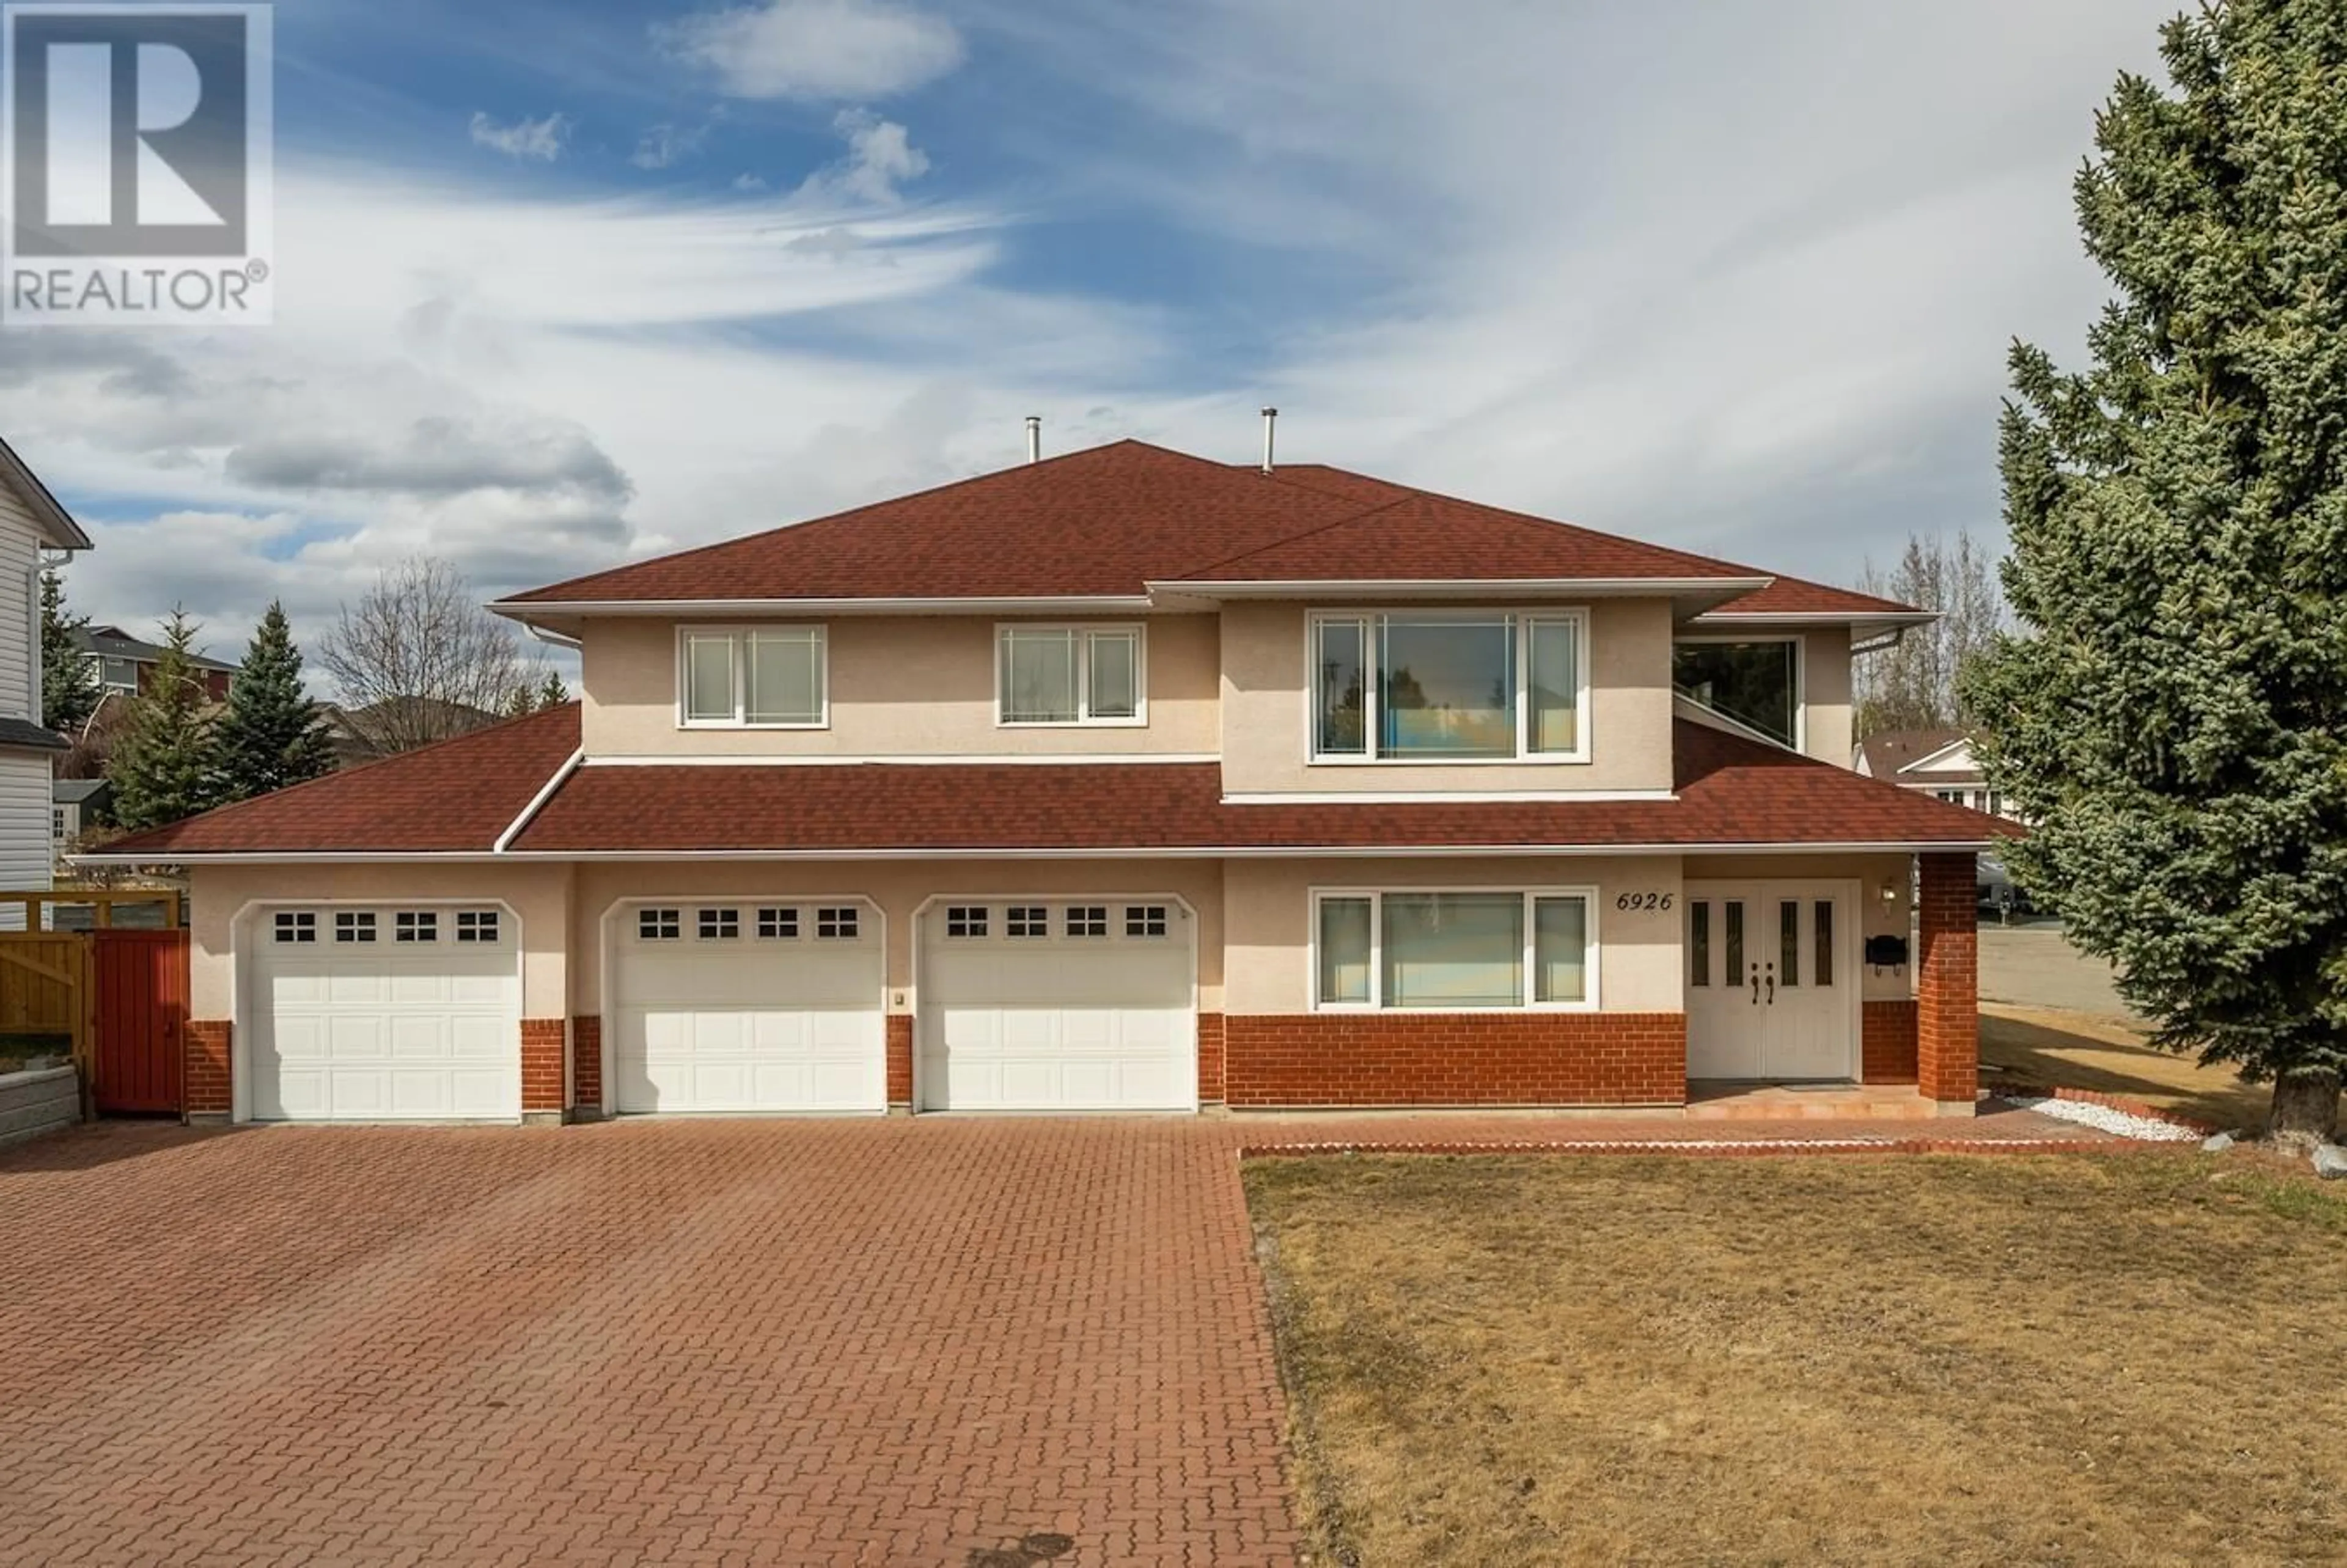 Home with brick exterior material for 6926 ST ANTHONY CRESCENT, Prince George British Columbia V2N5A4